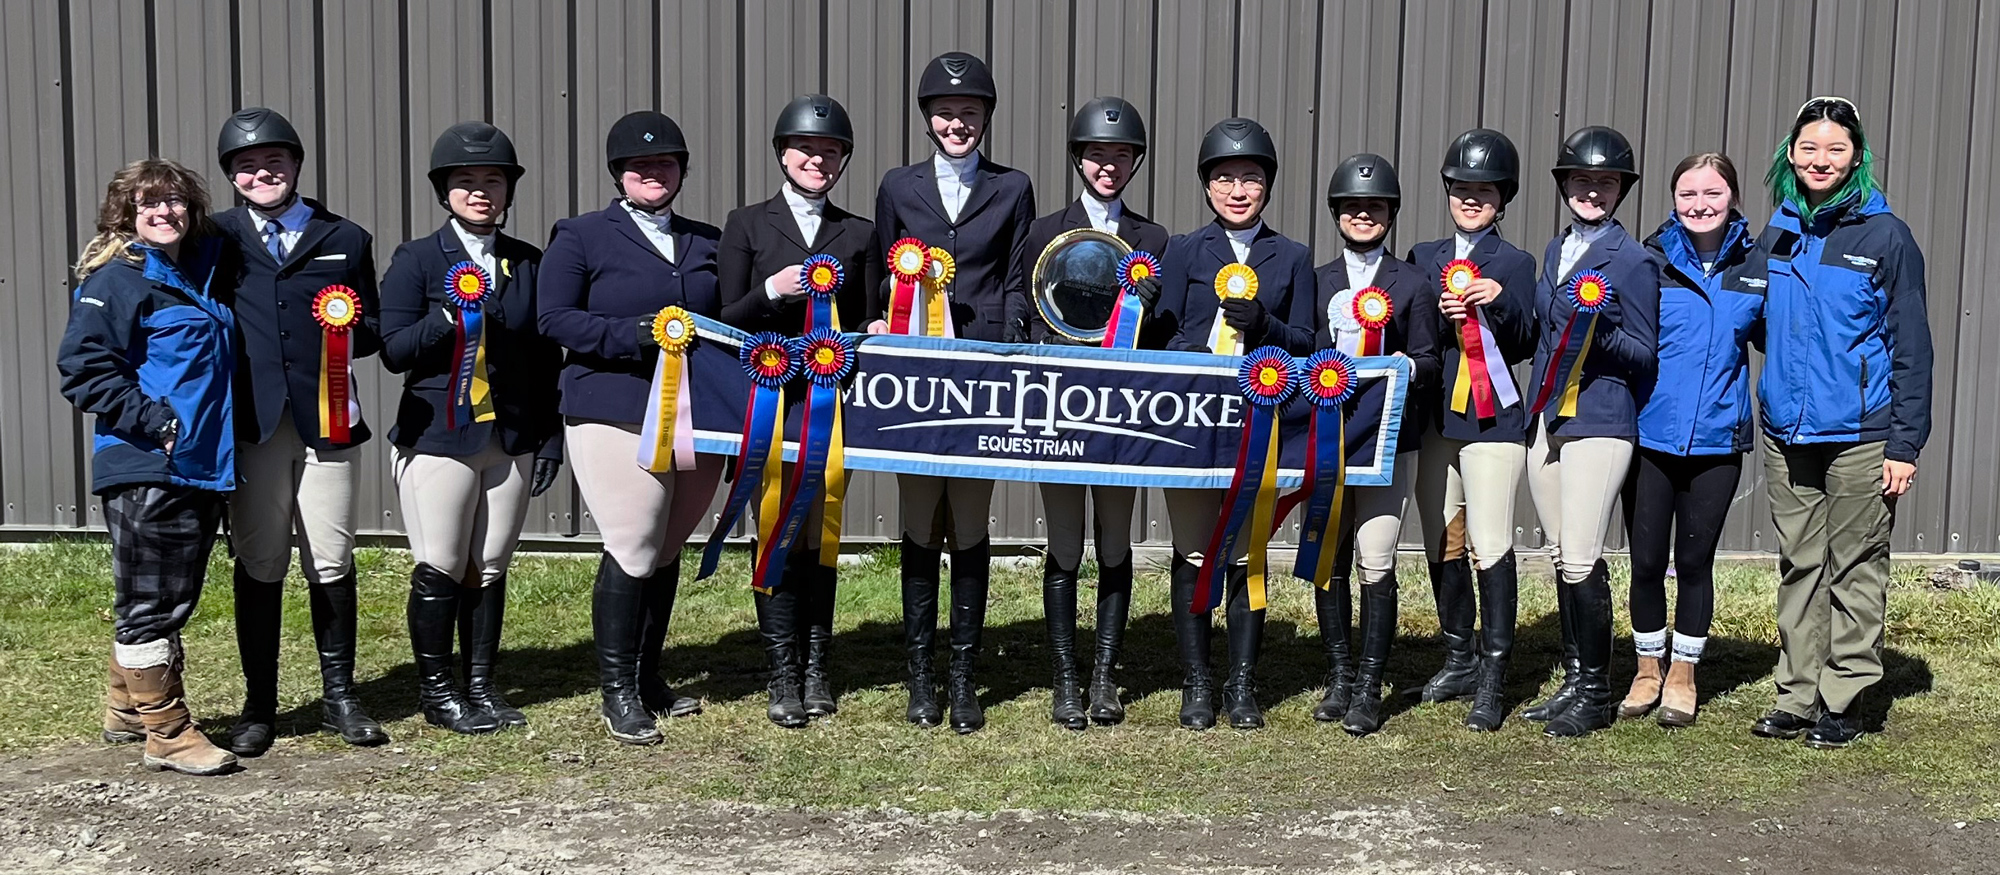 The IHSA Zone I Region 3 Championship ended with Mount Holyoke being awarded High Point College honors and eight riders advancing to Zone I Championships in Berlin, Mass., on March 30, 2024.